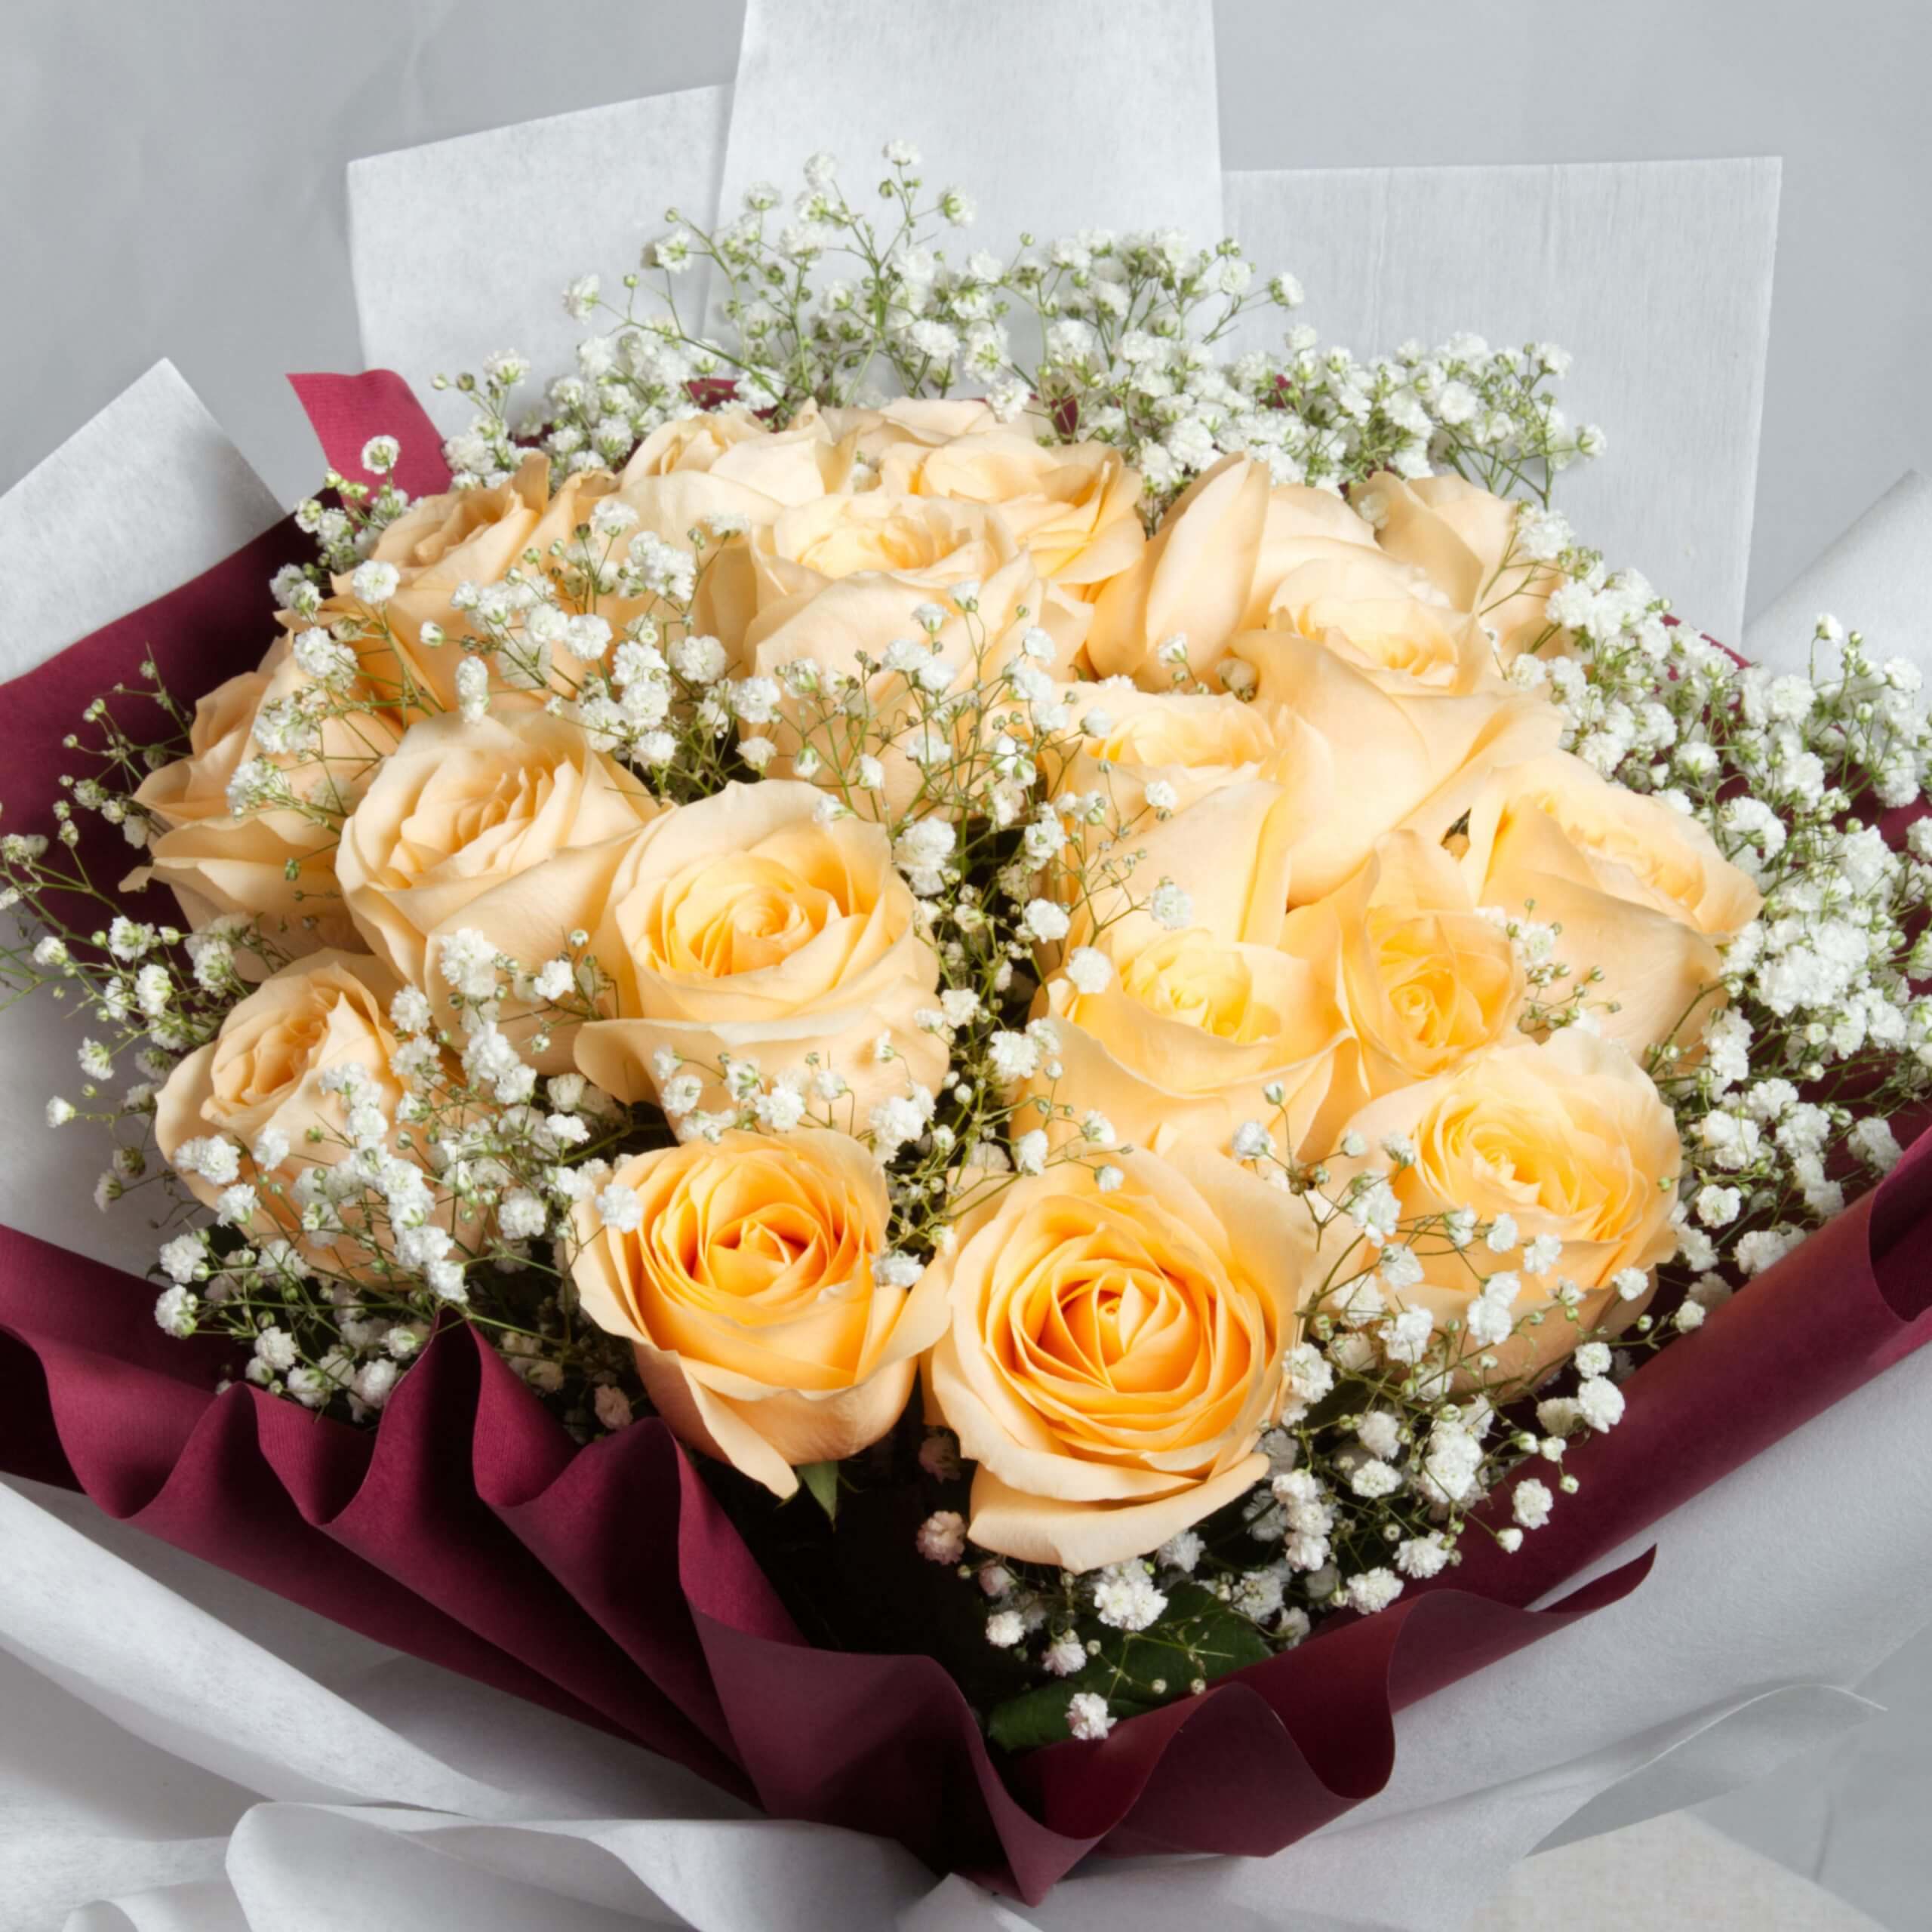 3 Best Types of Rose Bouquets in Singapore